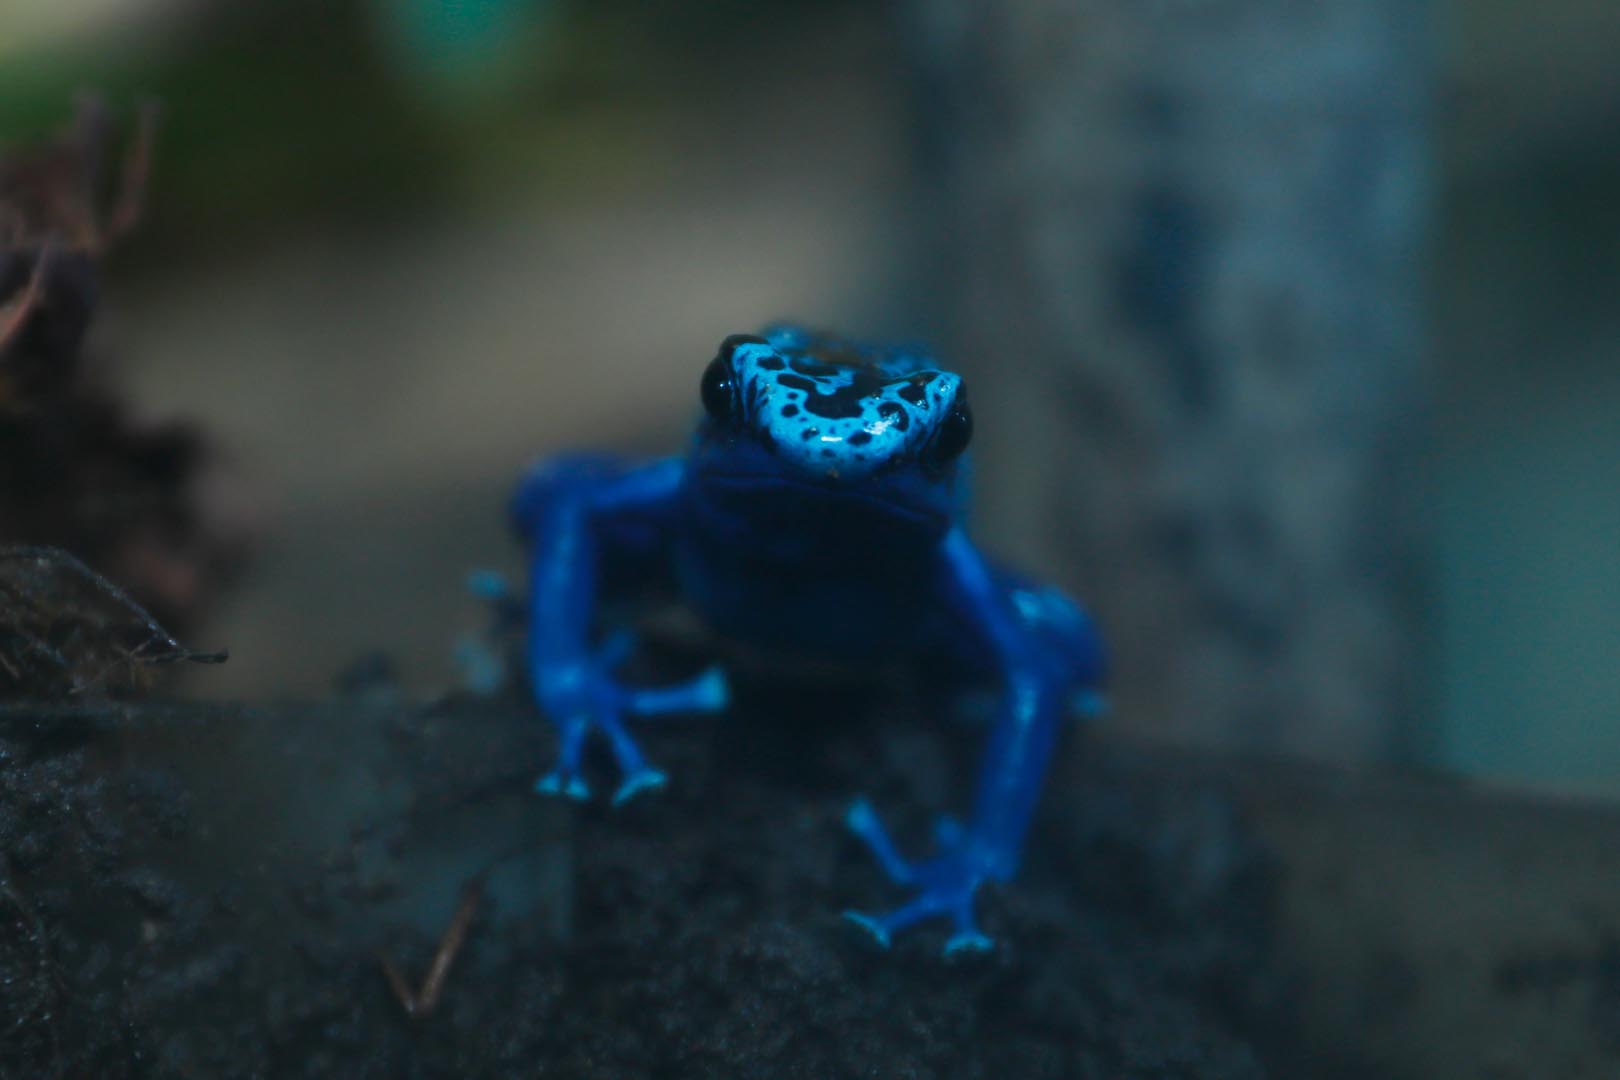 Blue poison dart frog looking at the camera (eye-contact) IMAGE: Laura Moore (2023)